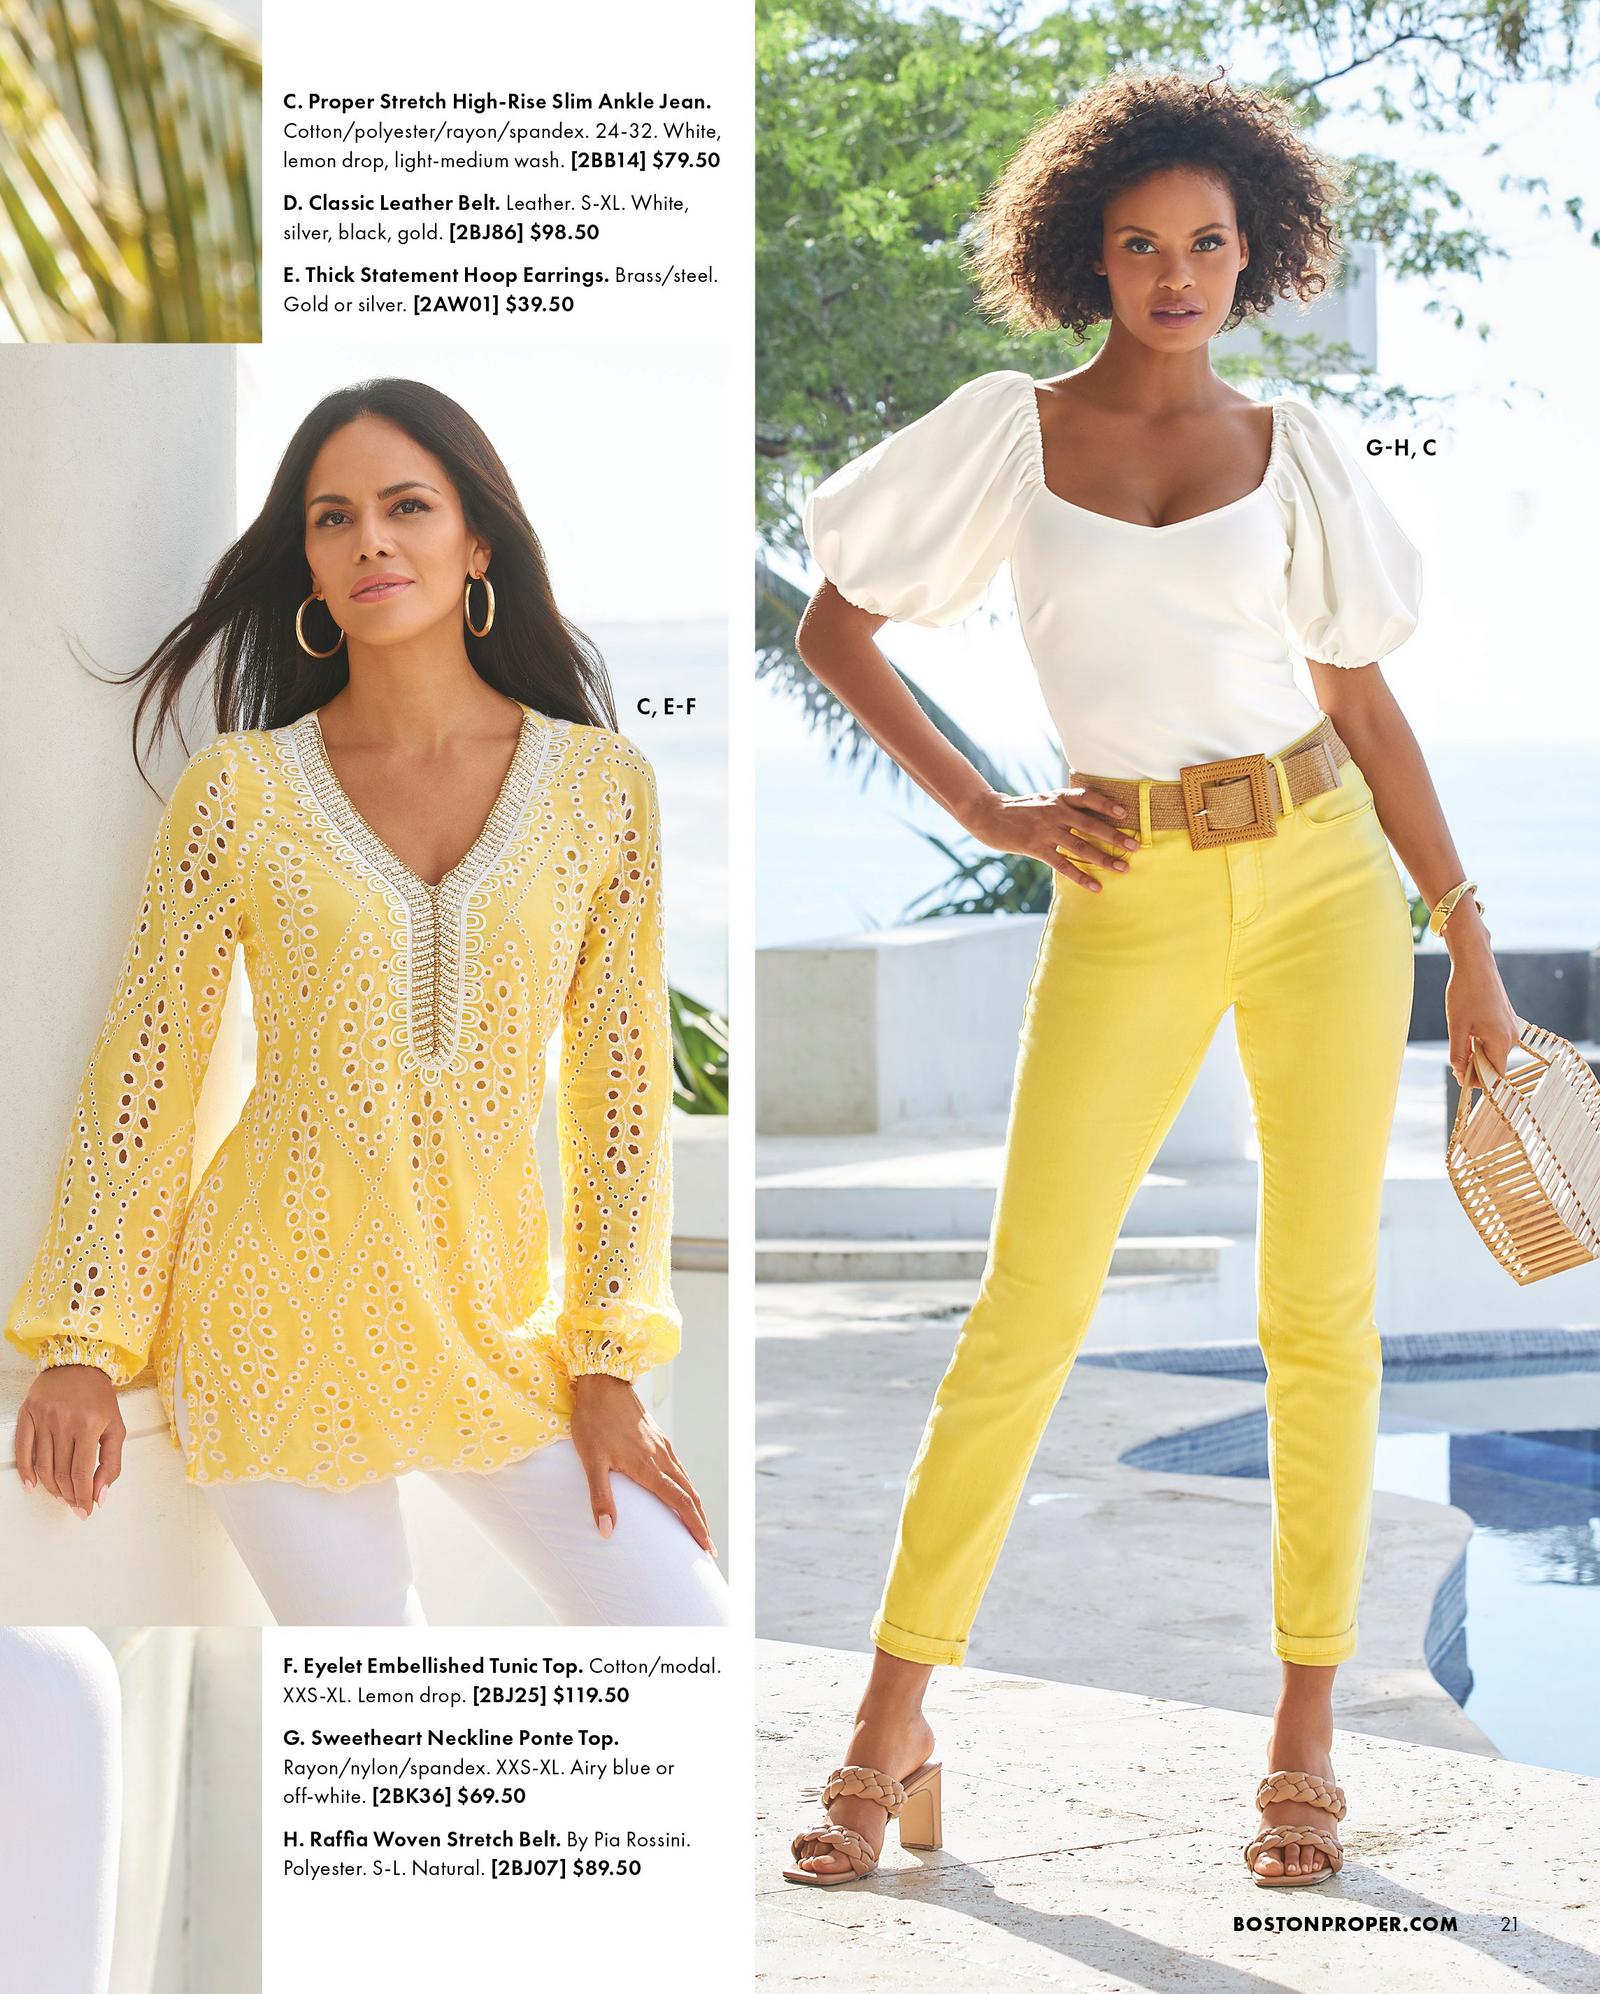 left model wearing a yellow eyelet embellished tunic top, gold hoop earrings, and white jeans. right model wearing a white puff-sleeve top, raffia belt, yellow jeans, and tan braided block heels.